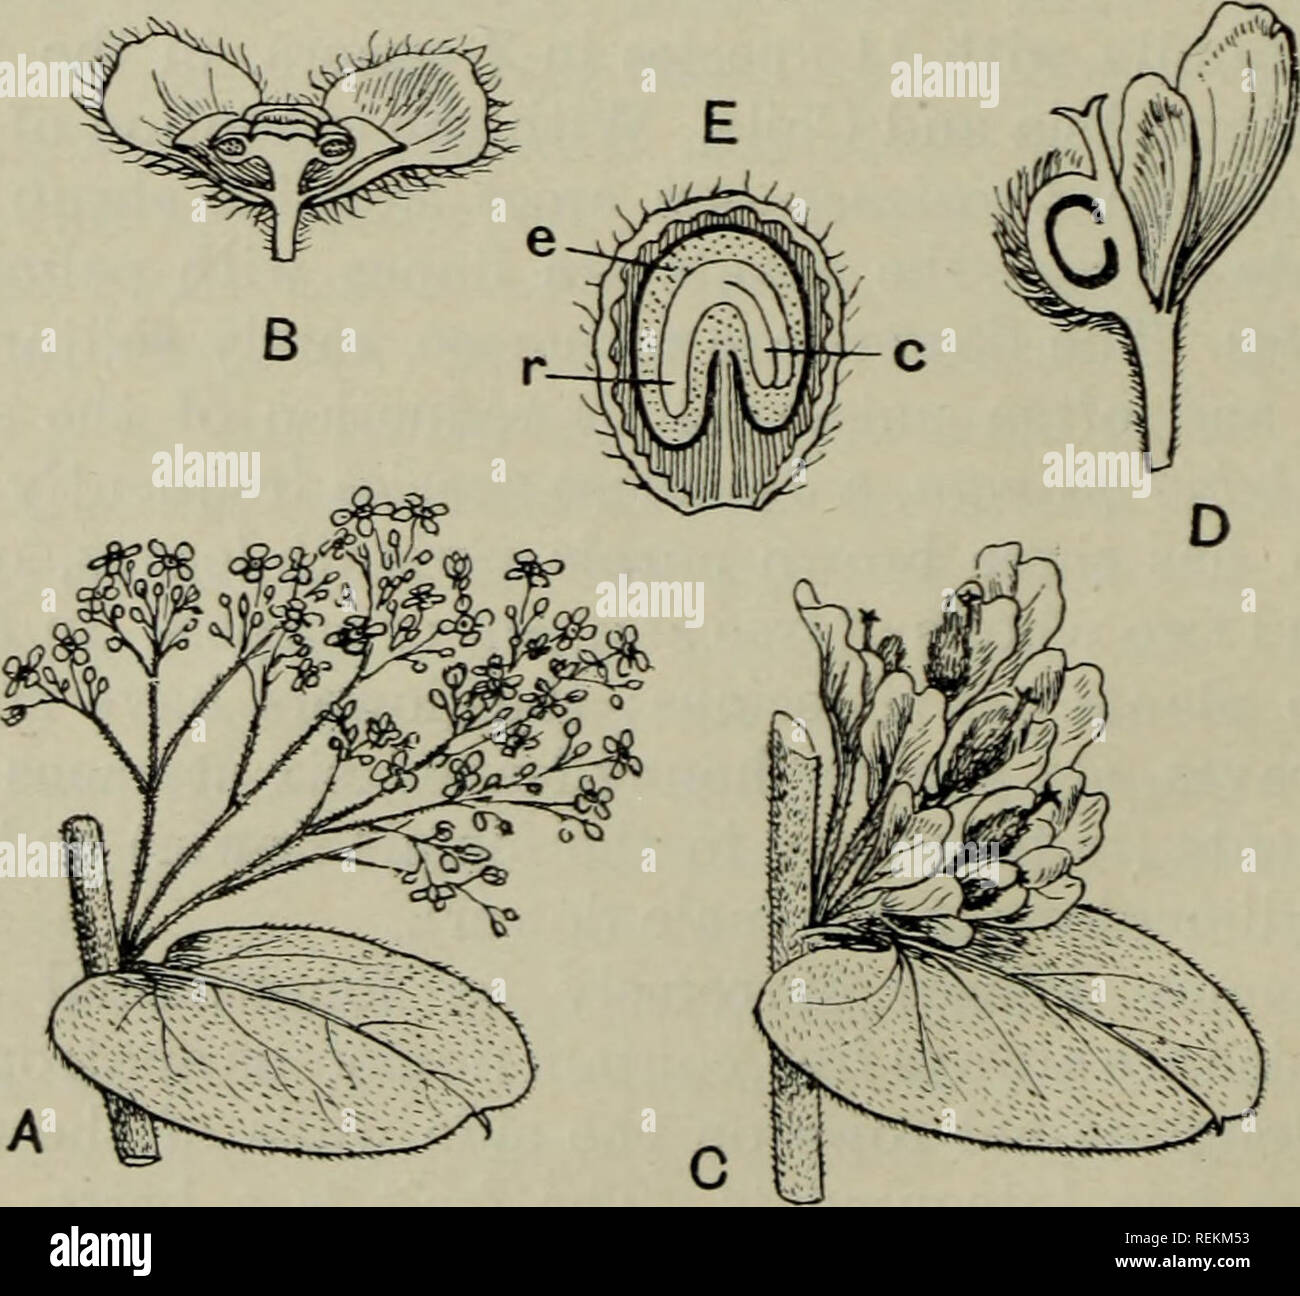 . The classification of flowering plants. Plants. Fig. 72. Hyperbaena domingensis. A. Portion of stem with flowers and ripe fruit, X f. B. Male flower with one of the interior sepals bent back, x 10. C. Stamen, x 30. D. Female flower, x 10. E. Pistil from female flower, x 60. F, G. Embryo, x f; c, cotyledons; r, radicle. (A, F, G after Miers; B-E after Eichler.) (From Flor. Jam.). Fig. 73. Cissampelos Pareira. A. Male inflorescence, x f. B. Male flower m section, x 10. C. Female inflorescence, x 6. D. Female flower in section,. X 12. E. Drupe cut lengthwise, x4; c, cotyledons; e, endosperm; r, Stock Photo